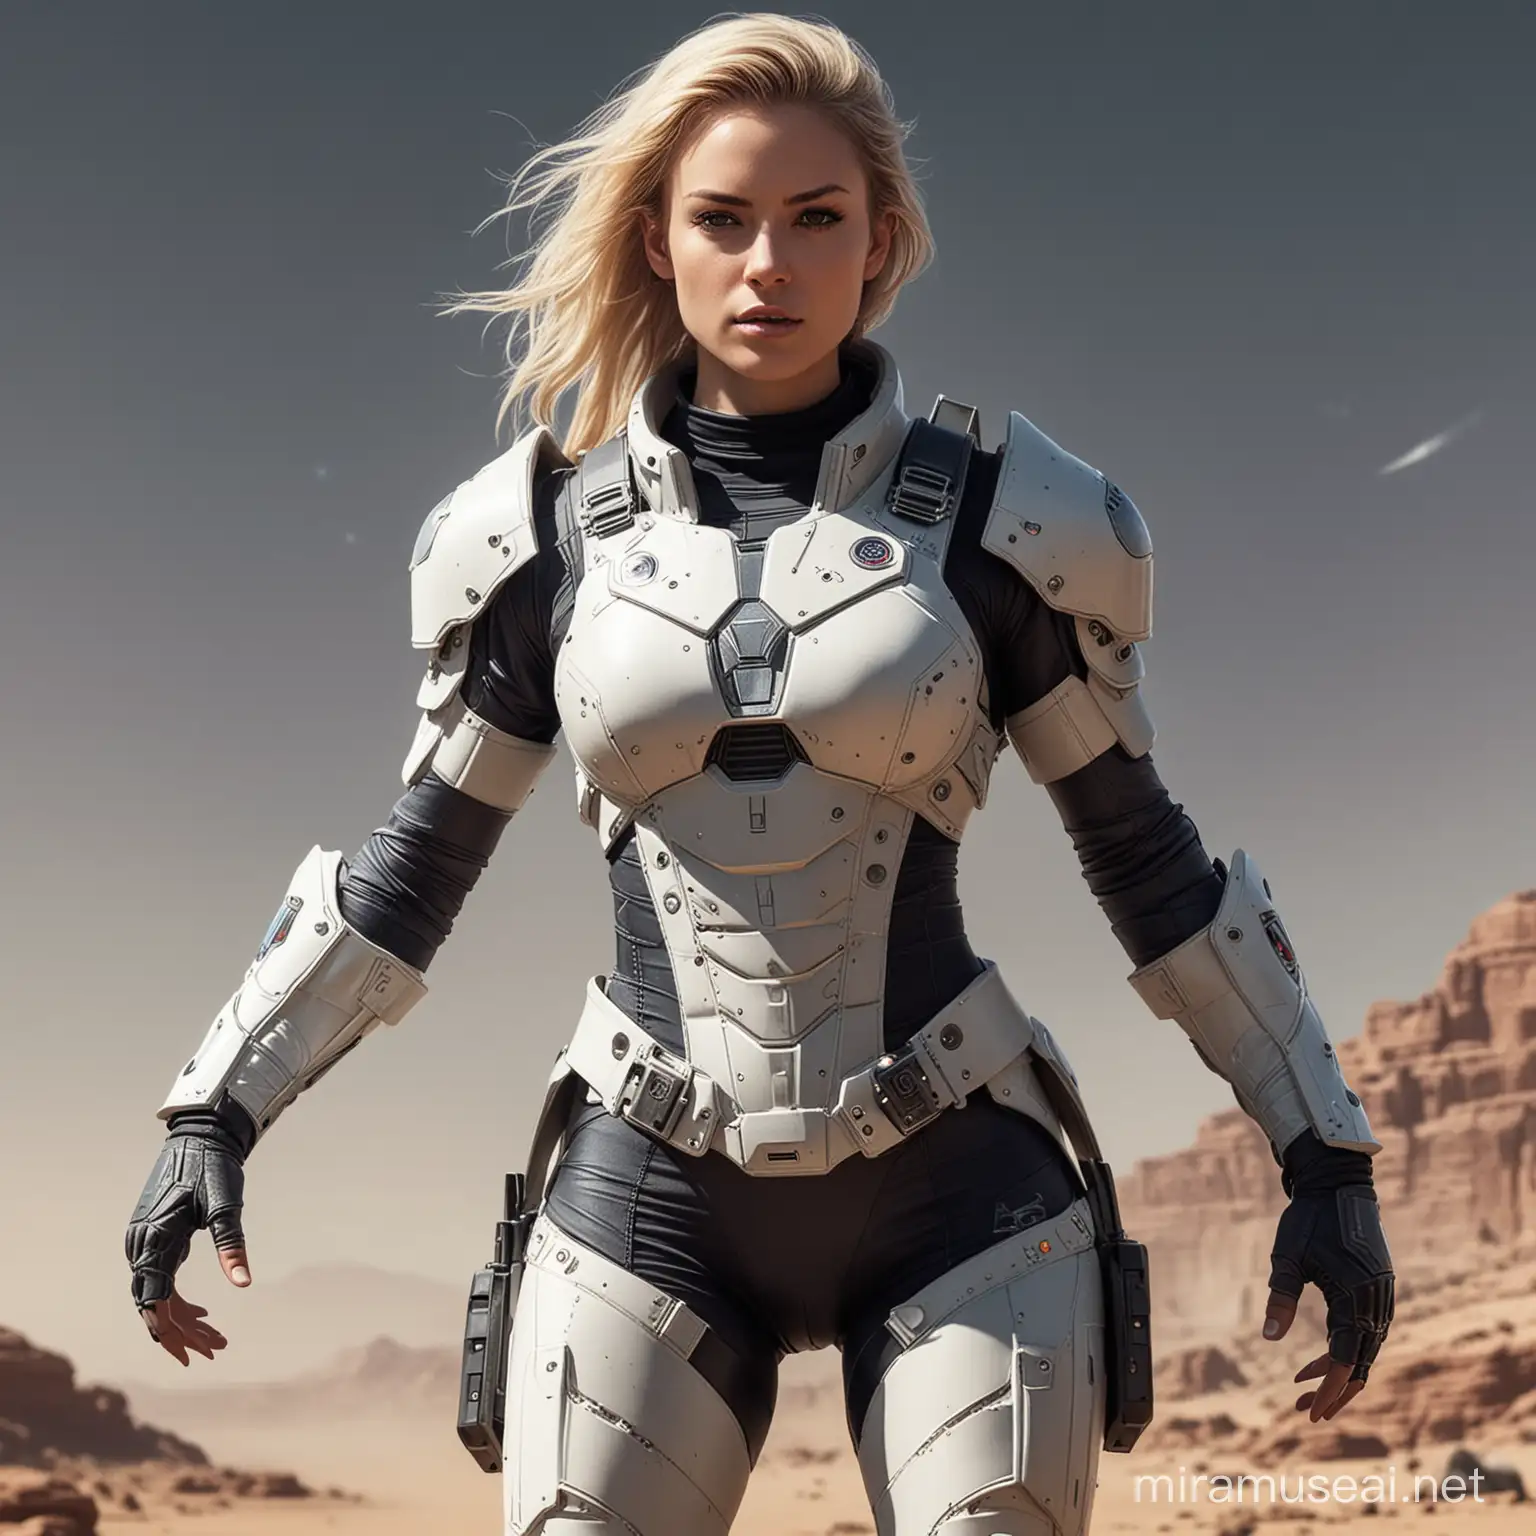 Fierce Female Space Ranger in Intense Battle Futuristic Armor and Heroic Stance